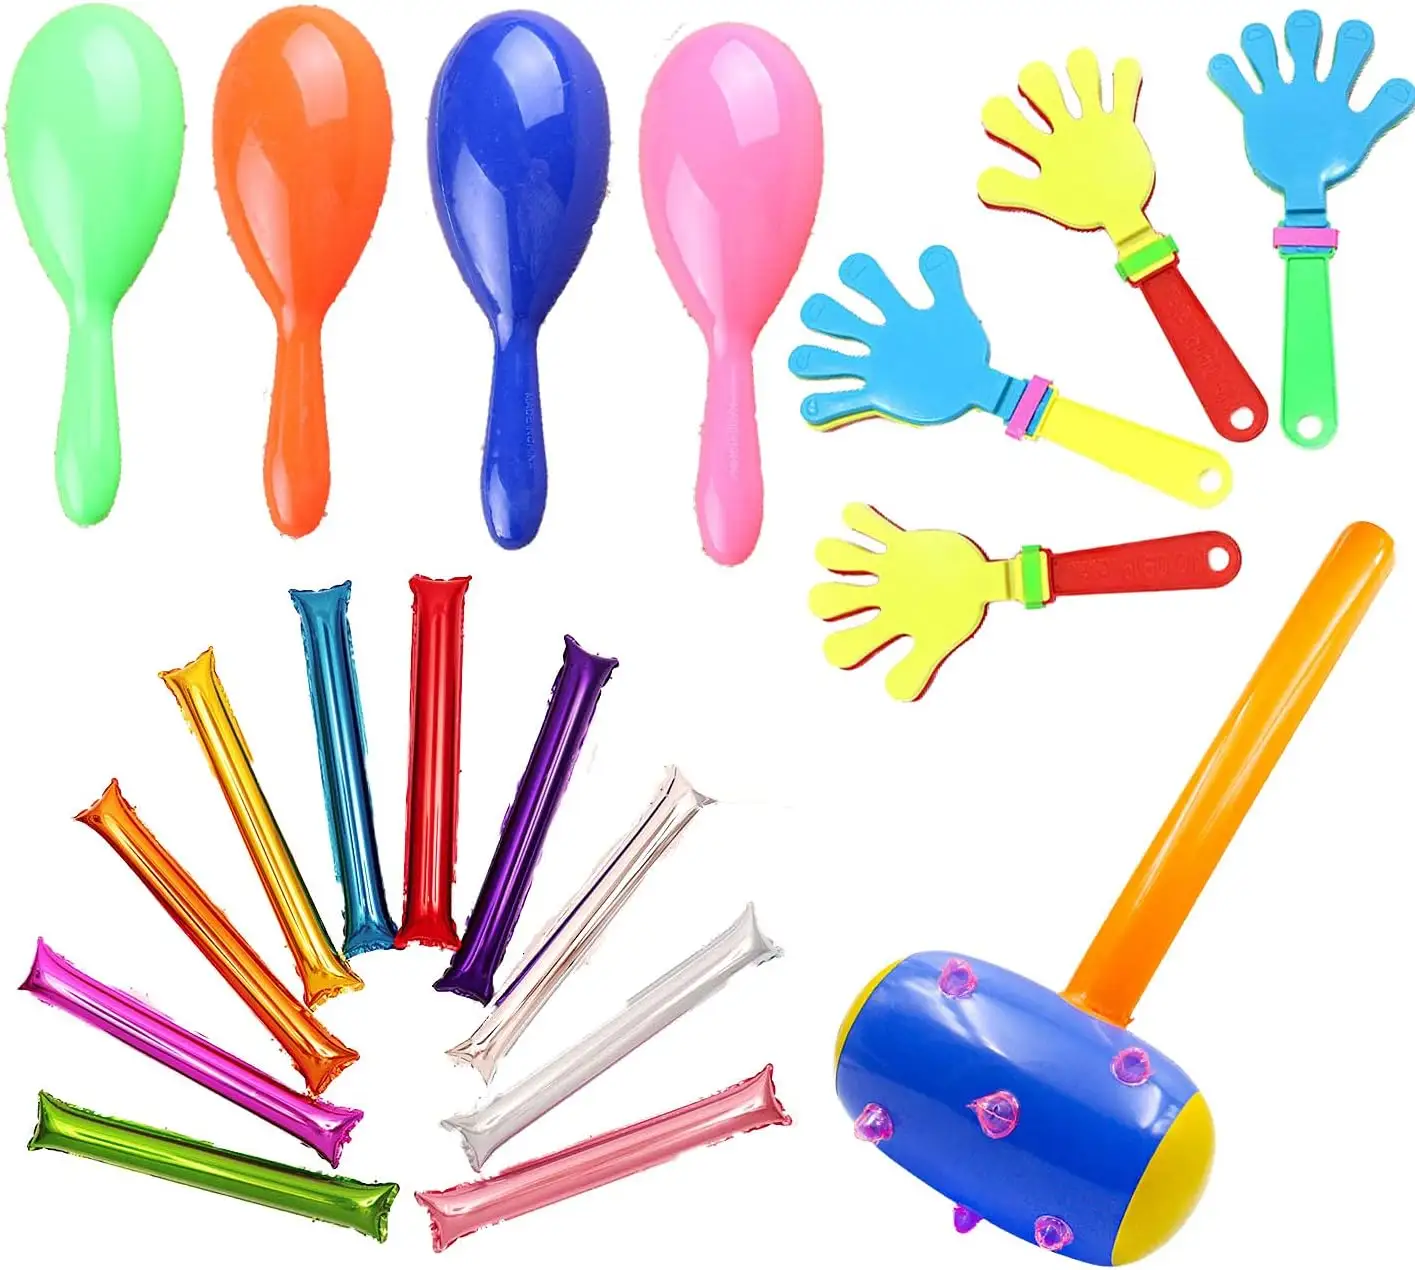 Sweet Keding Hand Clappers Noise Maker Inflating Cheer Sticks Rods Colorful Sports Noise Makers Plastic Cheering Sticks